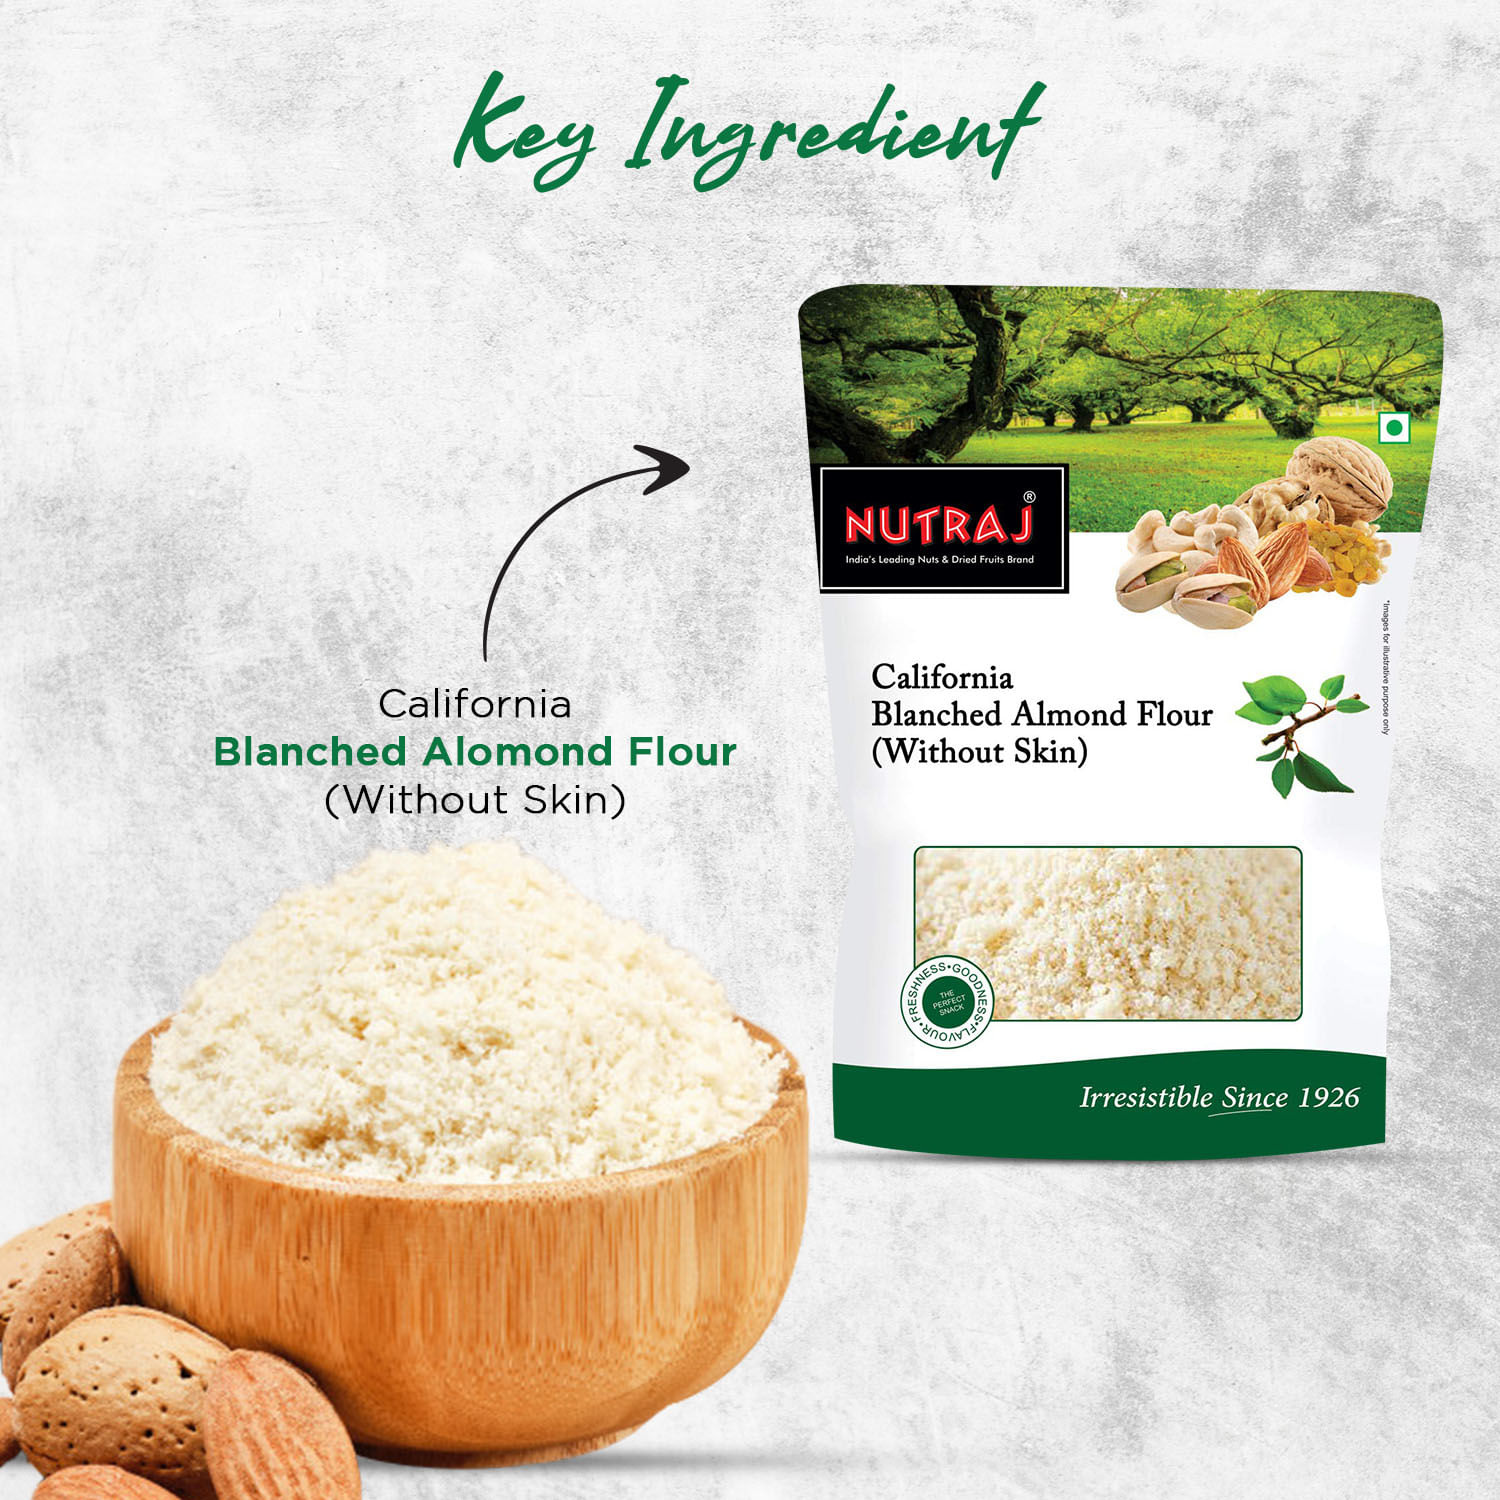 Nutraj California Blanched Almond Flour (Without Skin) 800 g (4 X 200g)